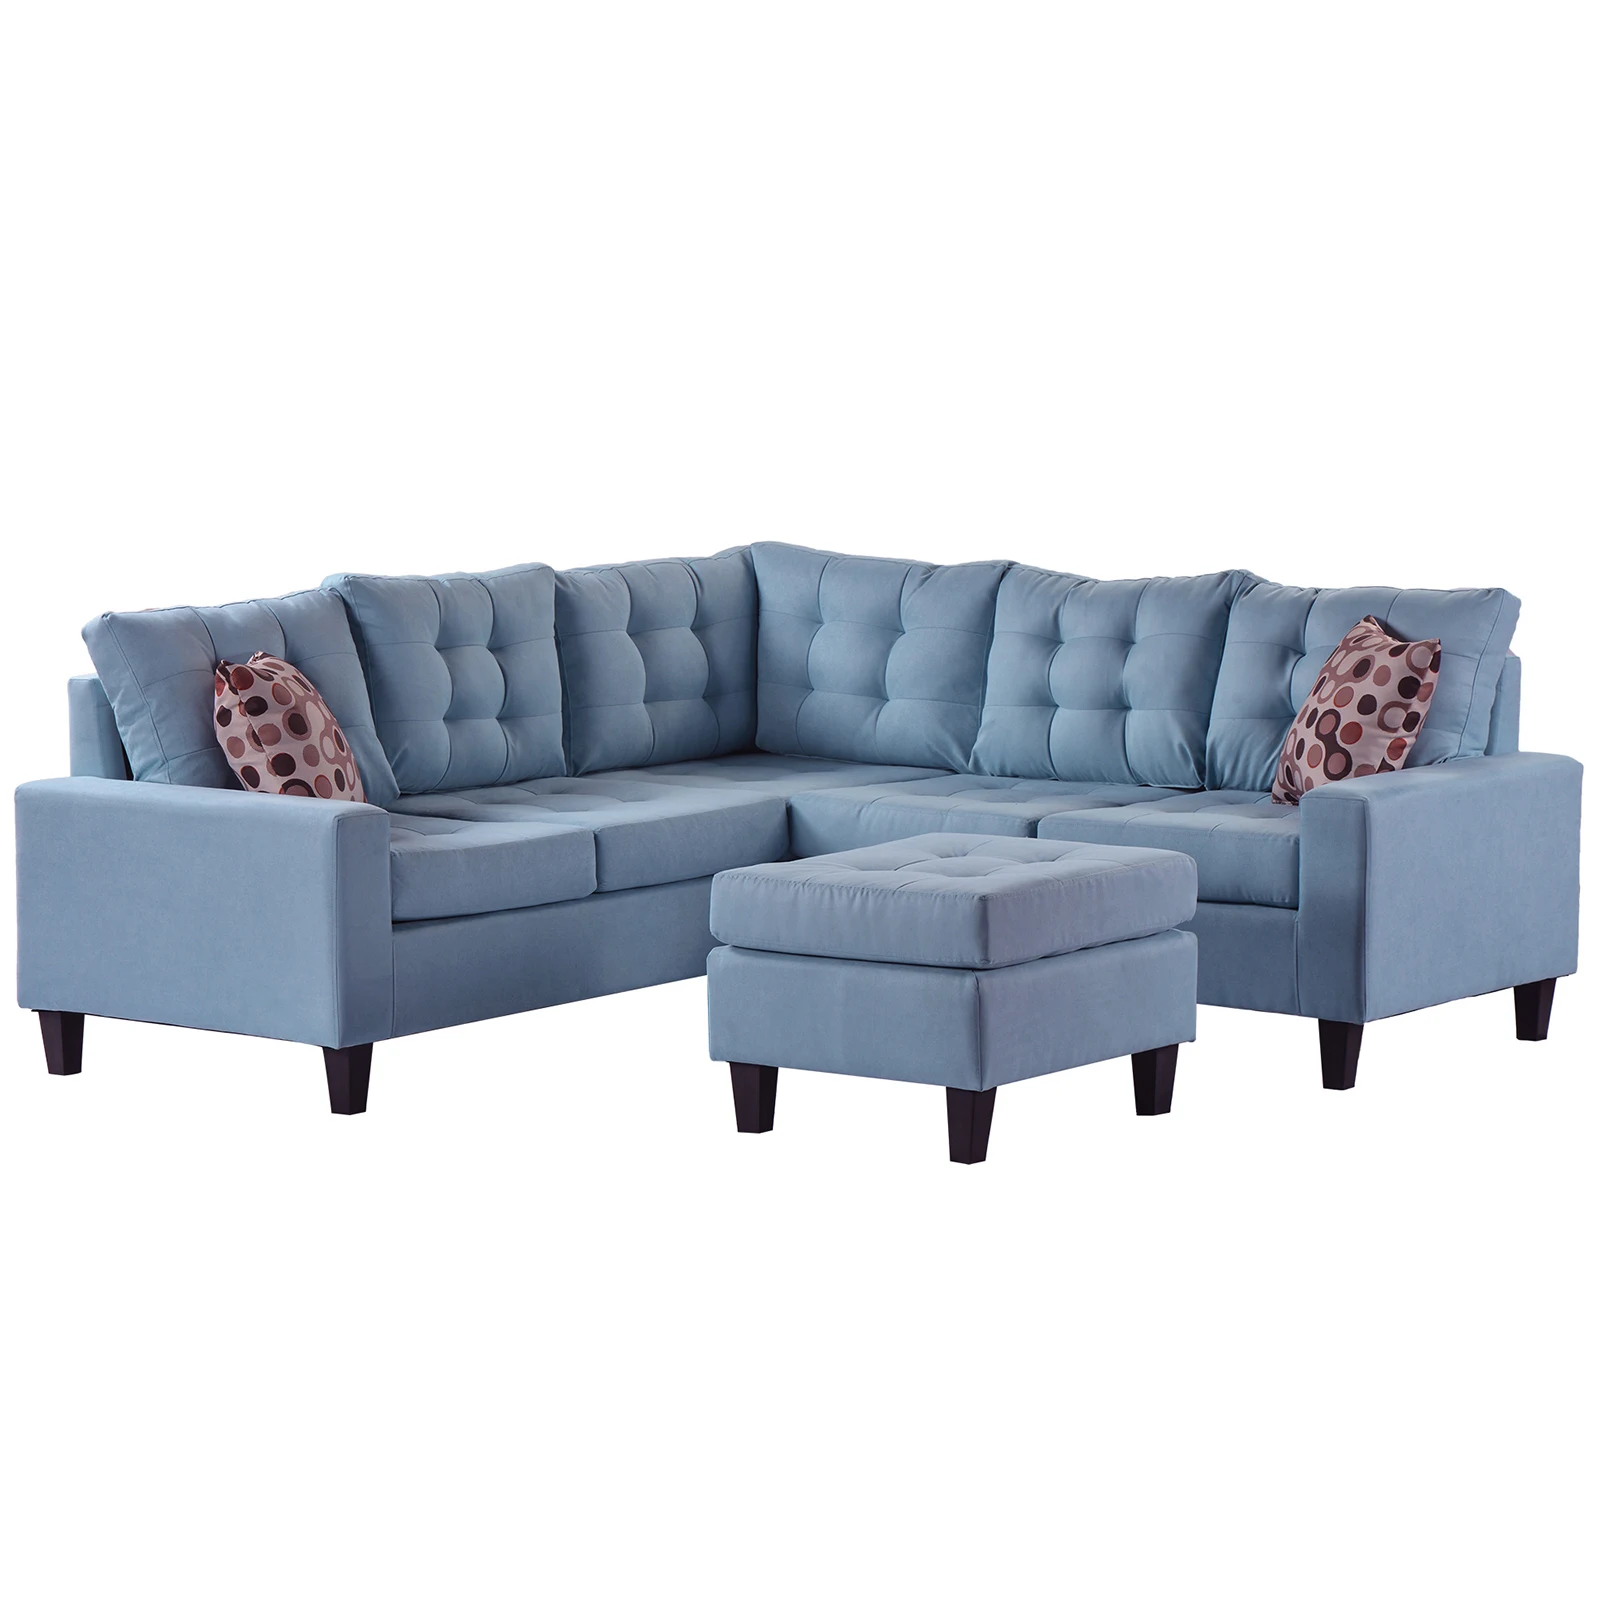 

Free shipping blue Gray L-Shaped Sofa Couch Living Room Rivet Modern Upholstered Set Sofa Sectional with Ottoman and Cushions